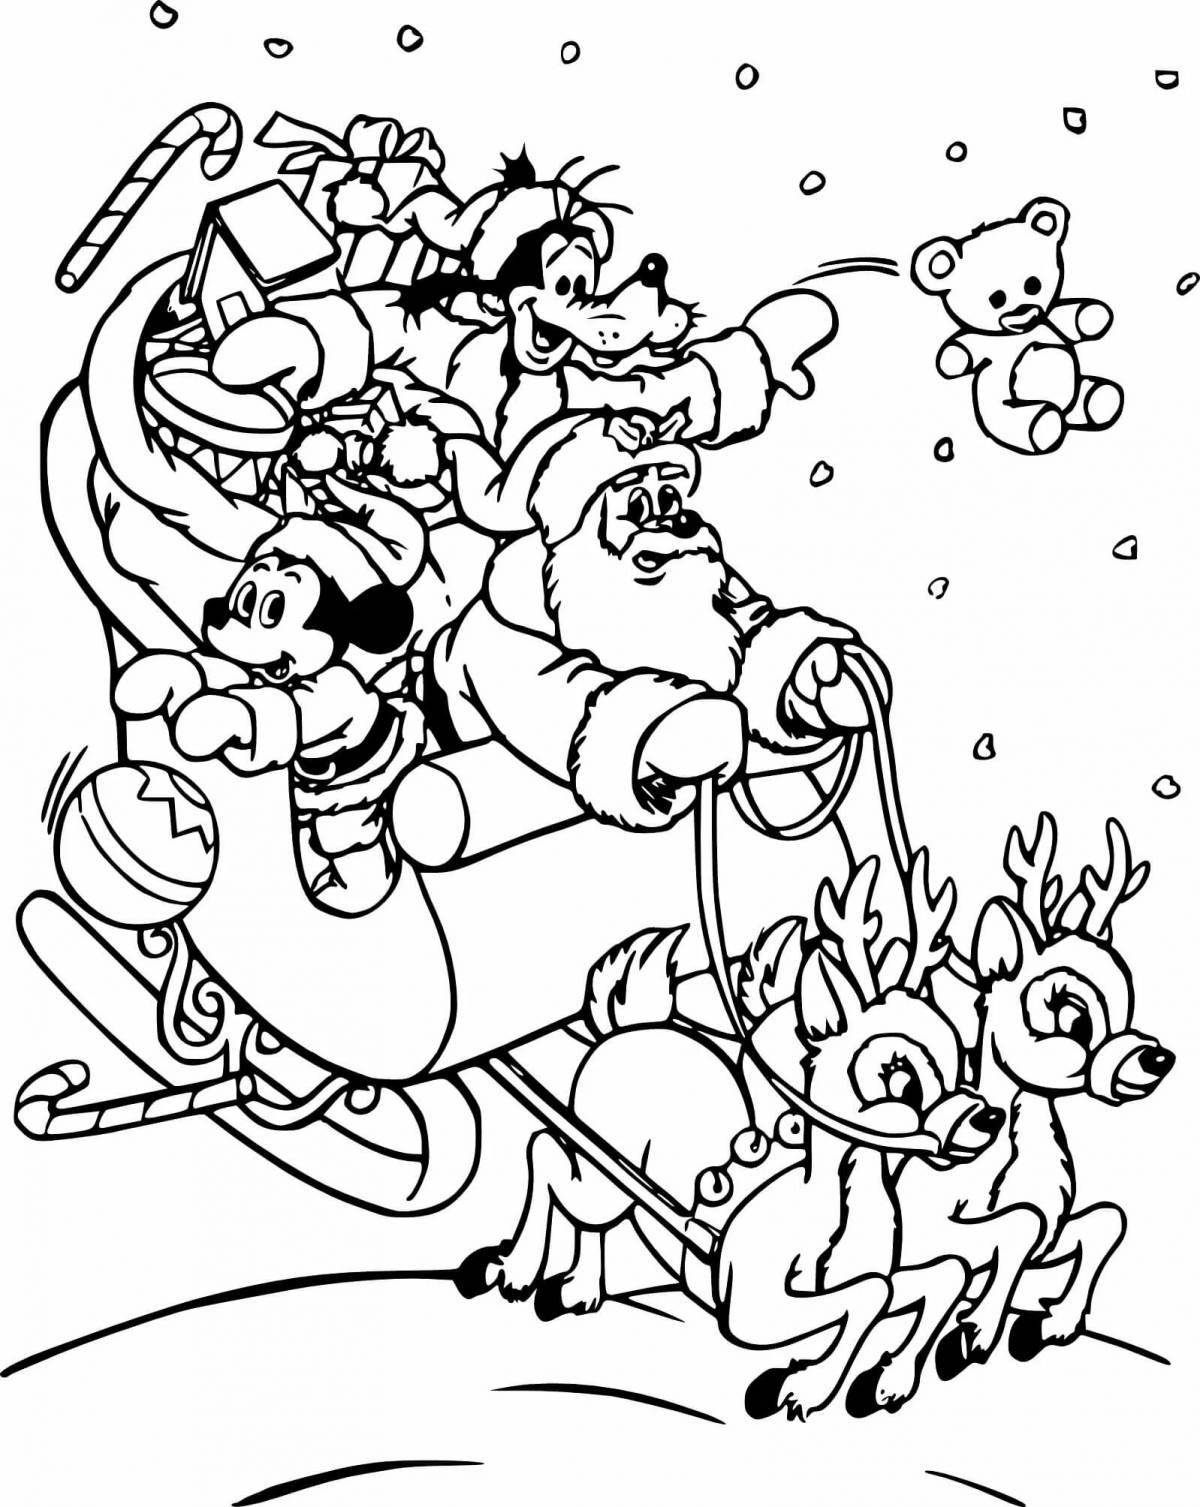 Animated Christmas characters coloring book